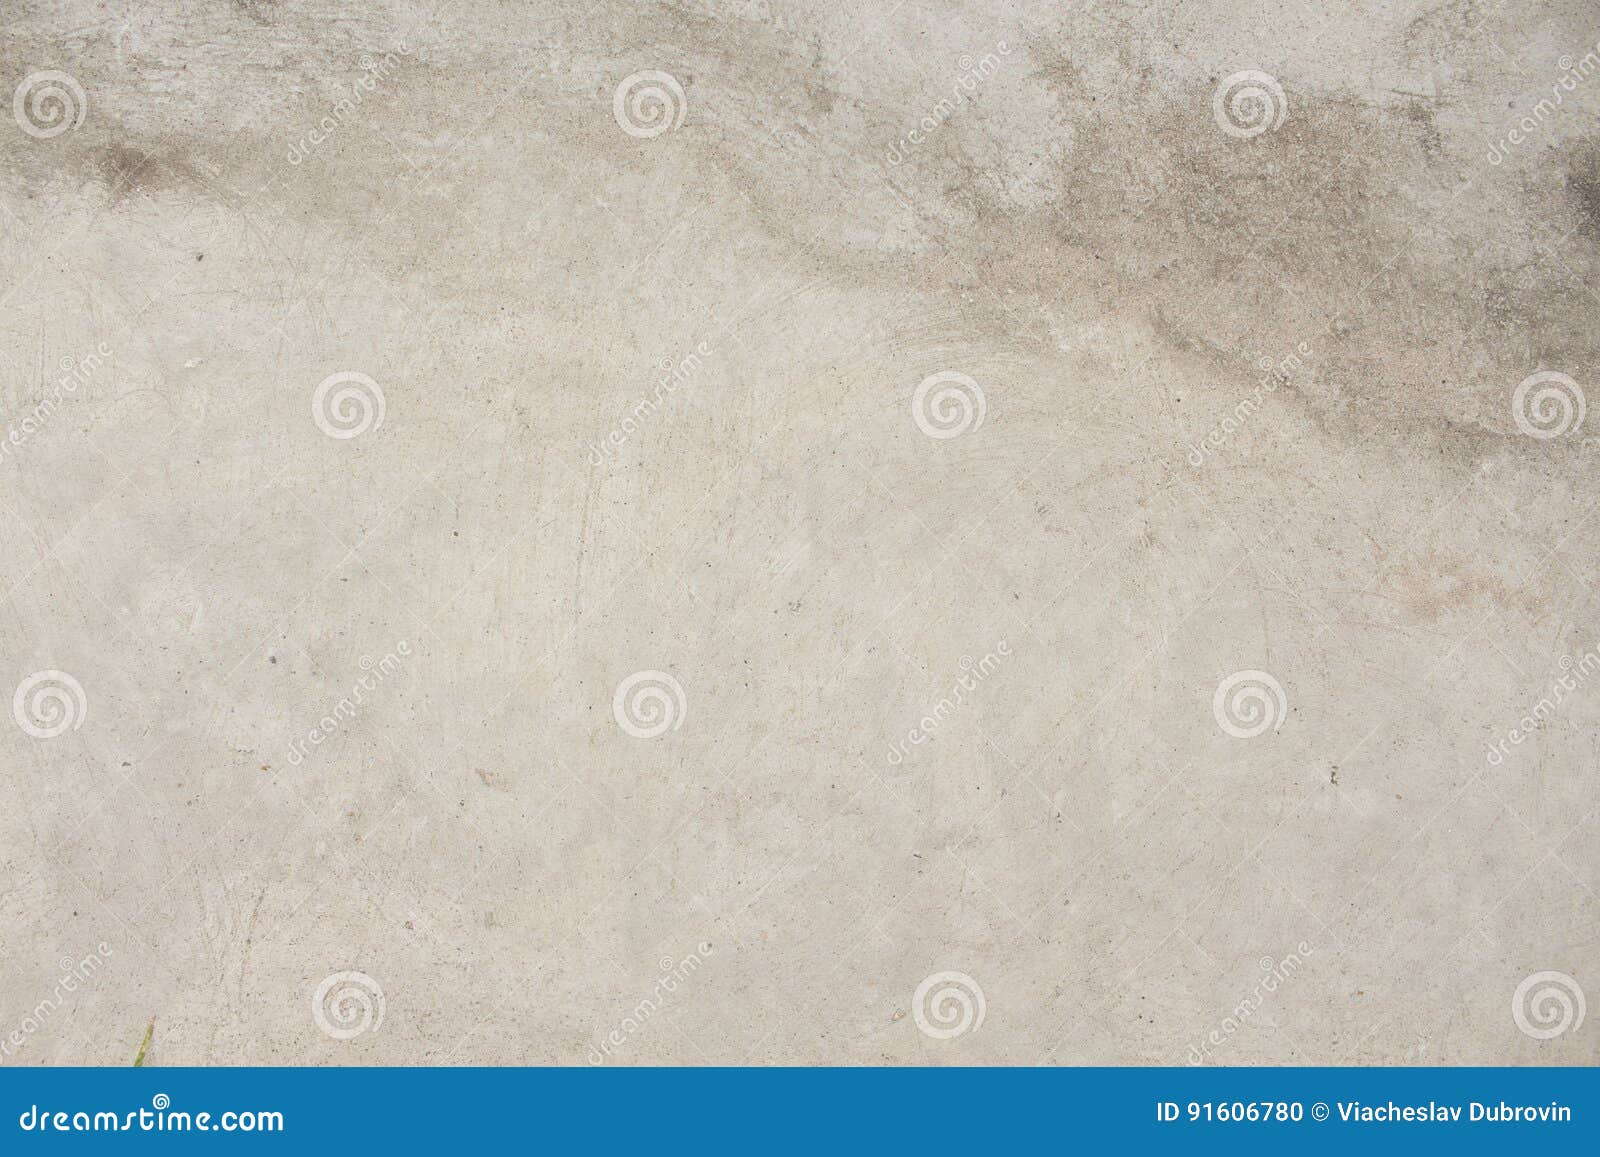 warm concrete texture photo for background. shabby chic backdrop.